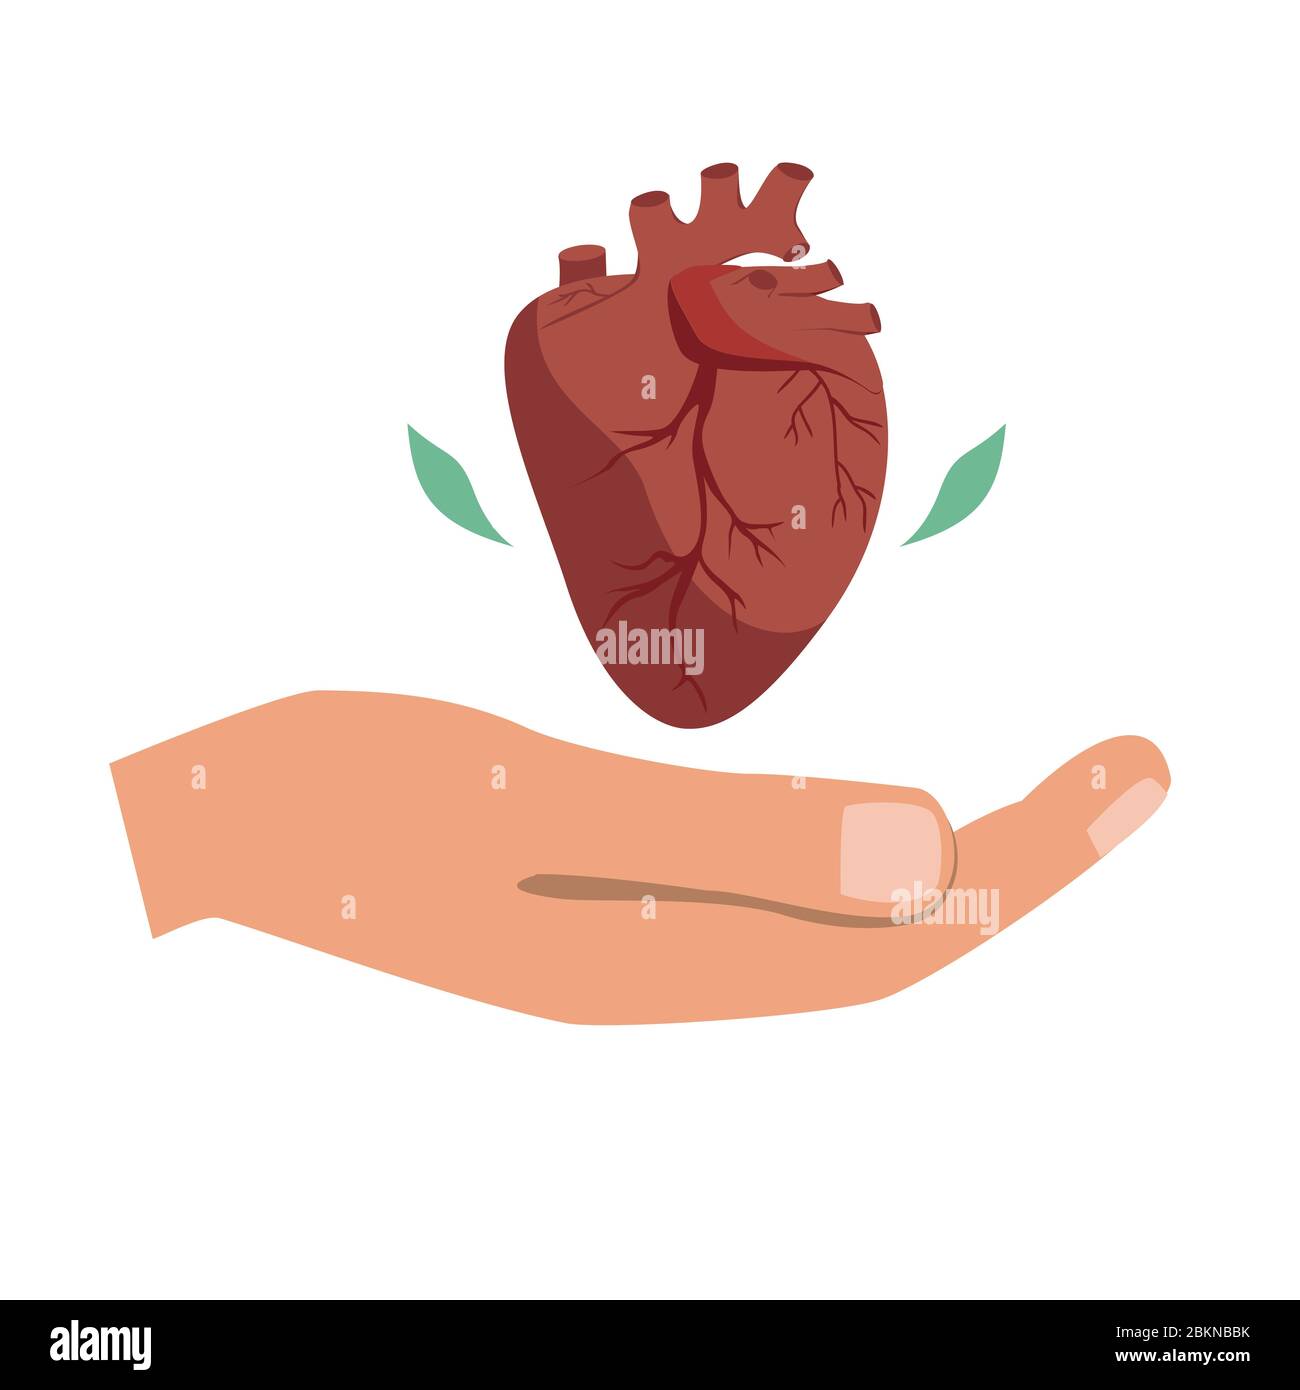 Heart donation vector. Giving hand with heart symbol. The bioengineering technologies for creating viable organs for transplantation concept. Stock Vector